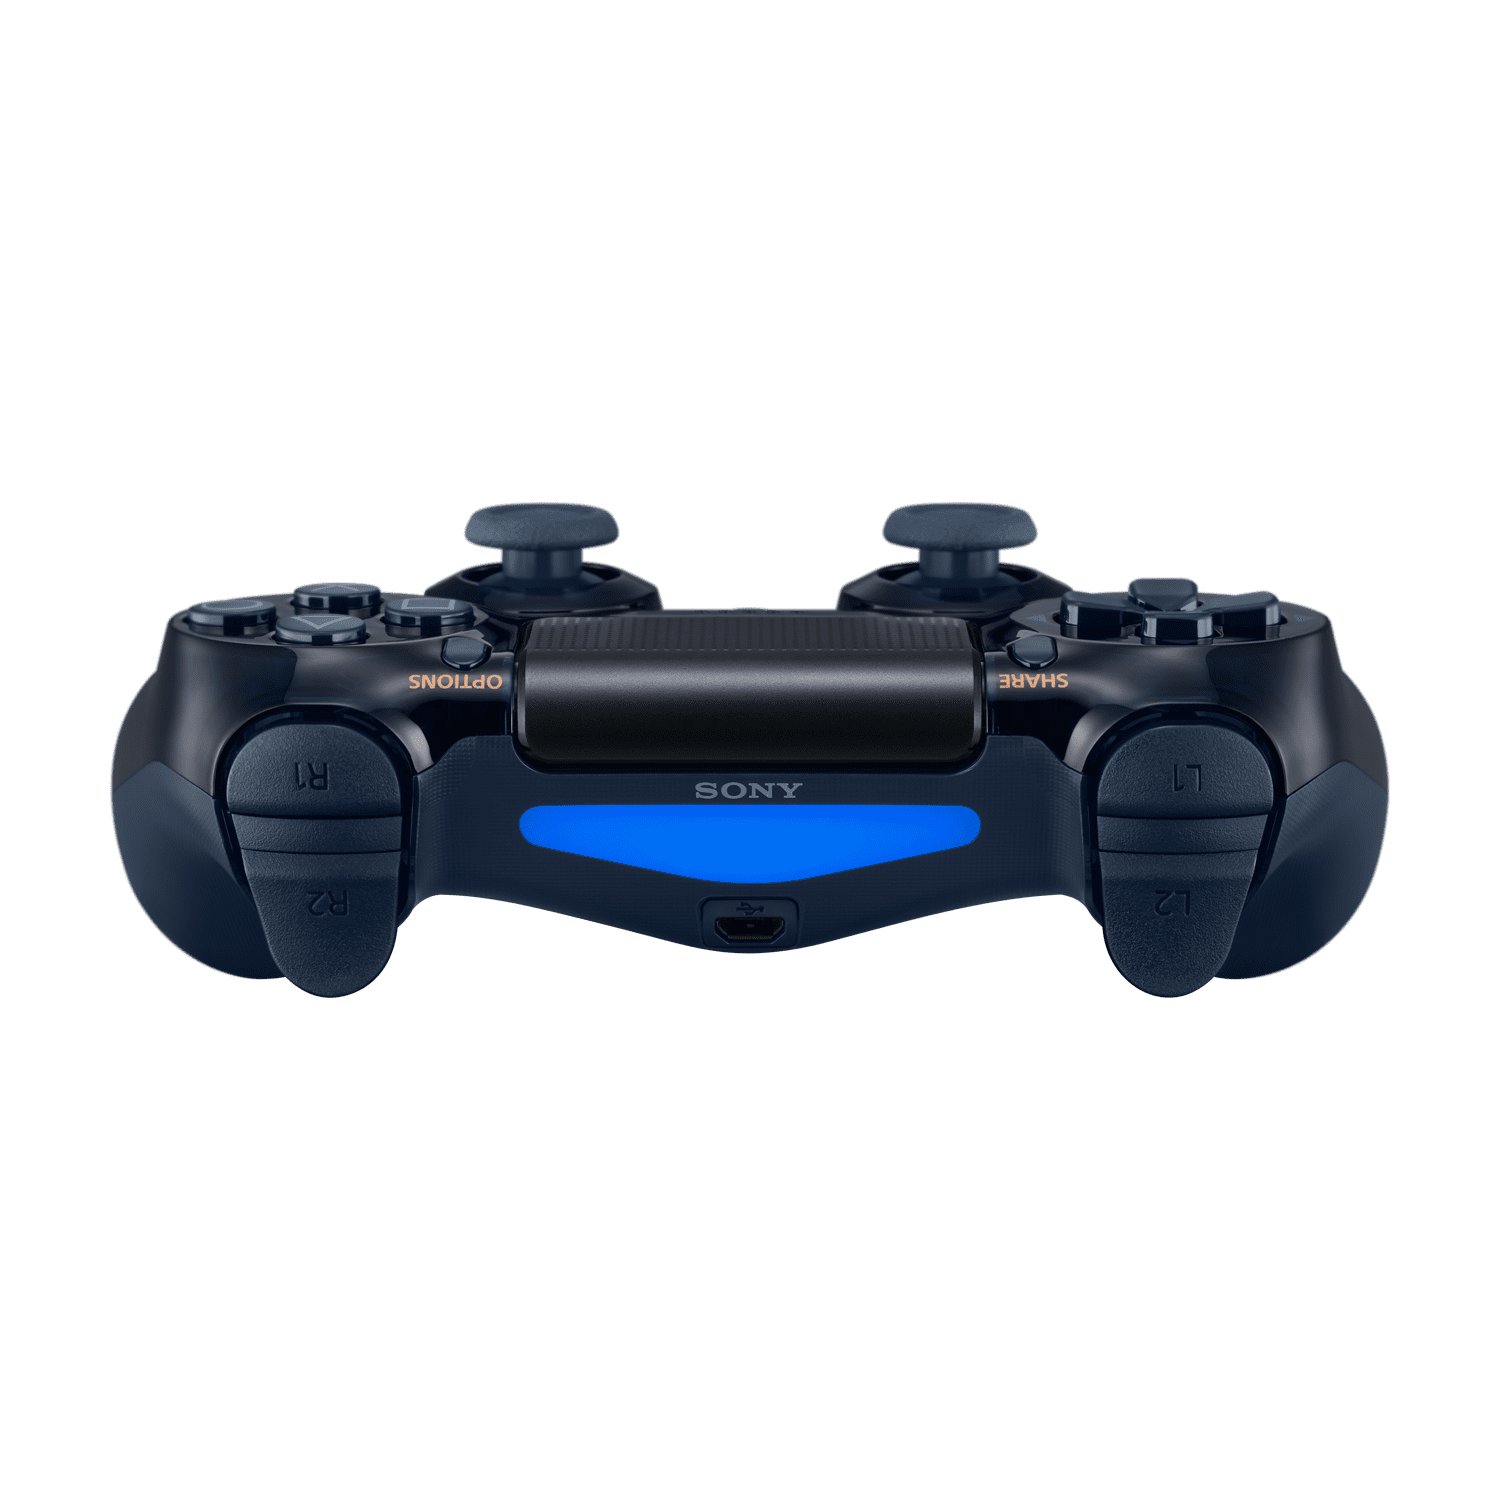 ps4 500 million edition controller